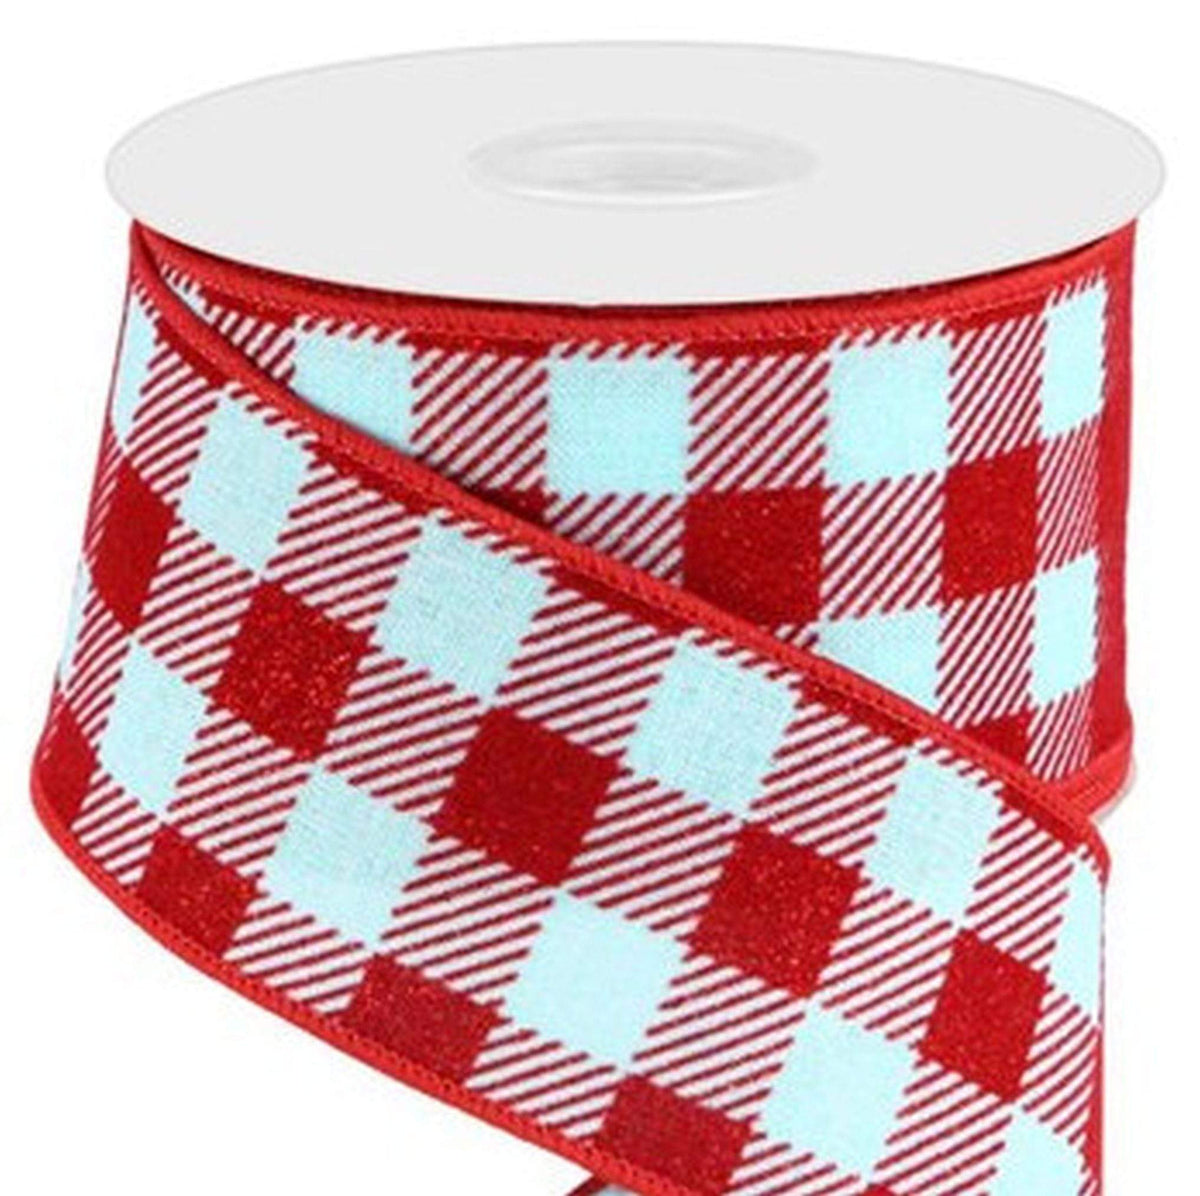 Wired Ribbon * Glitter Gingham * Red and White * 2.5 x 10 Yards